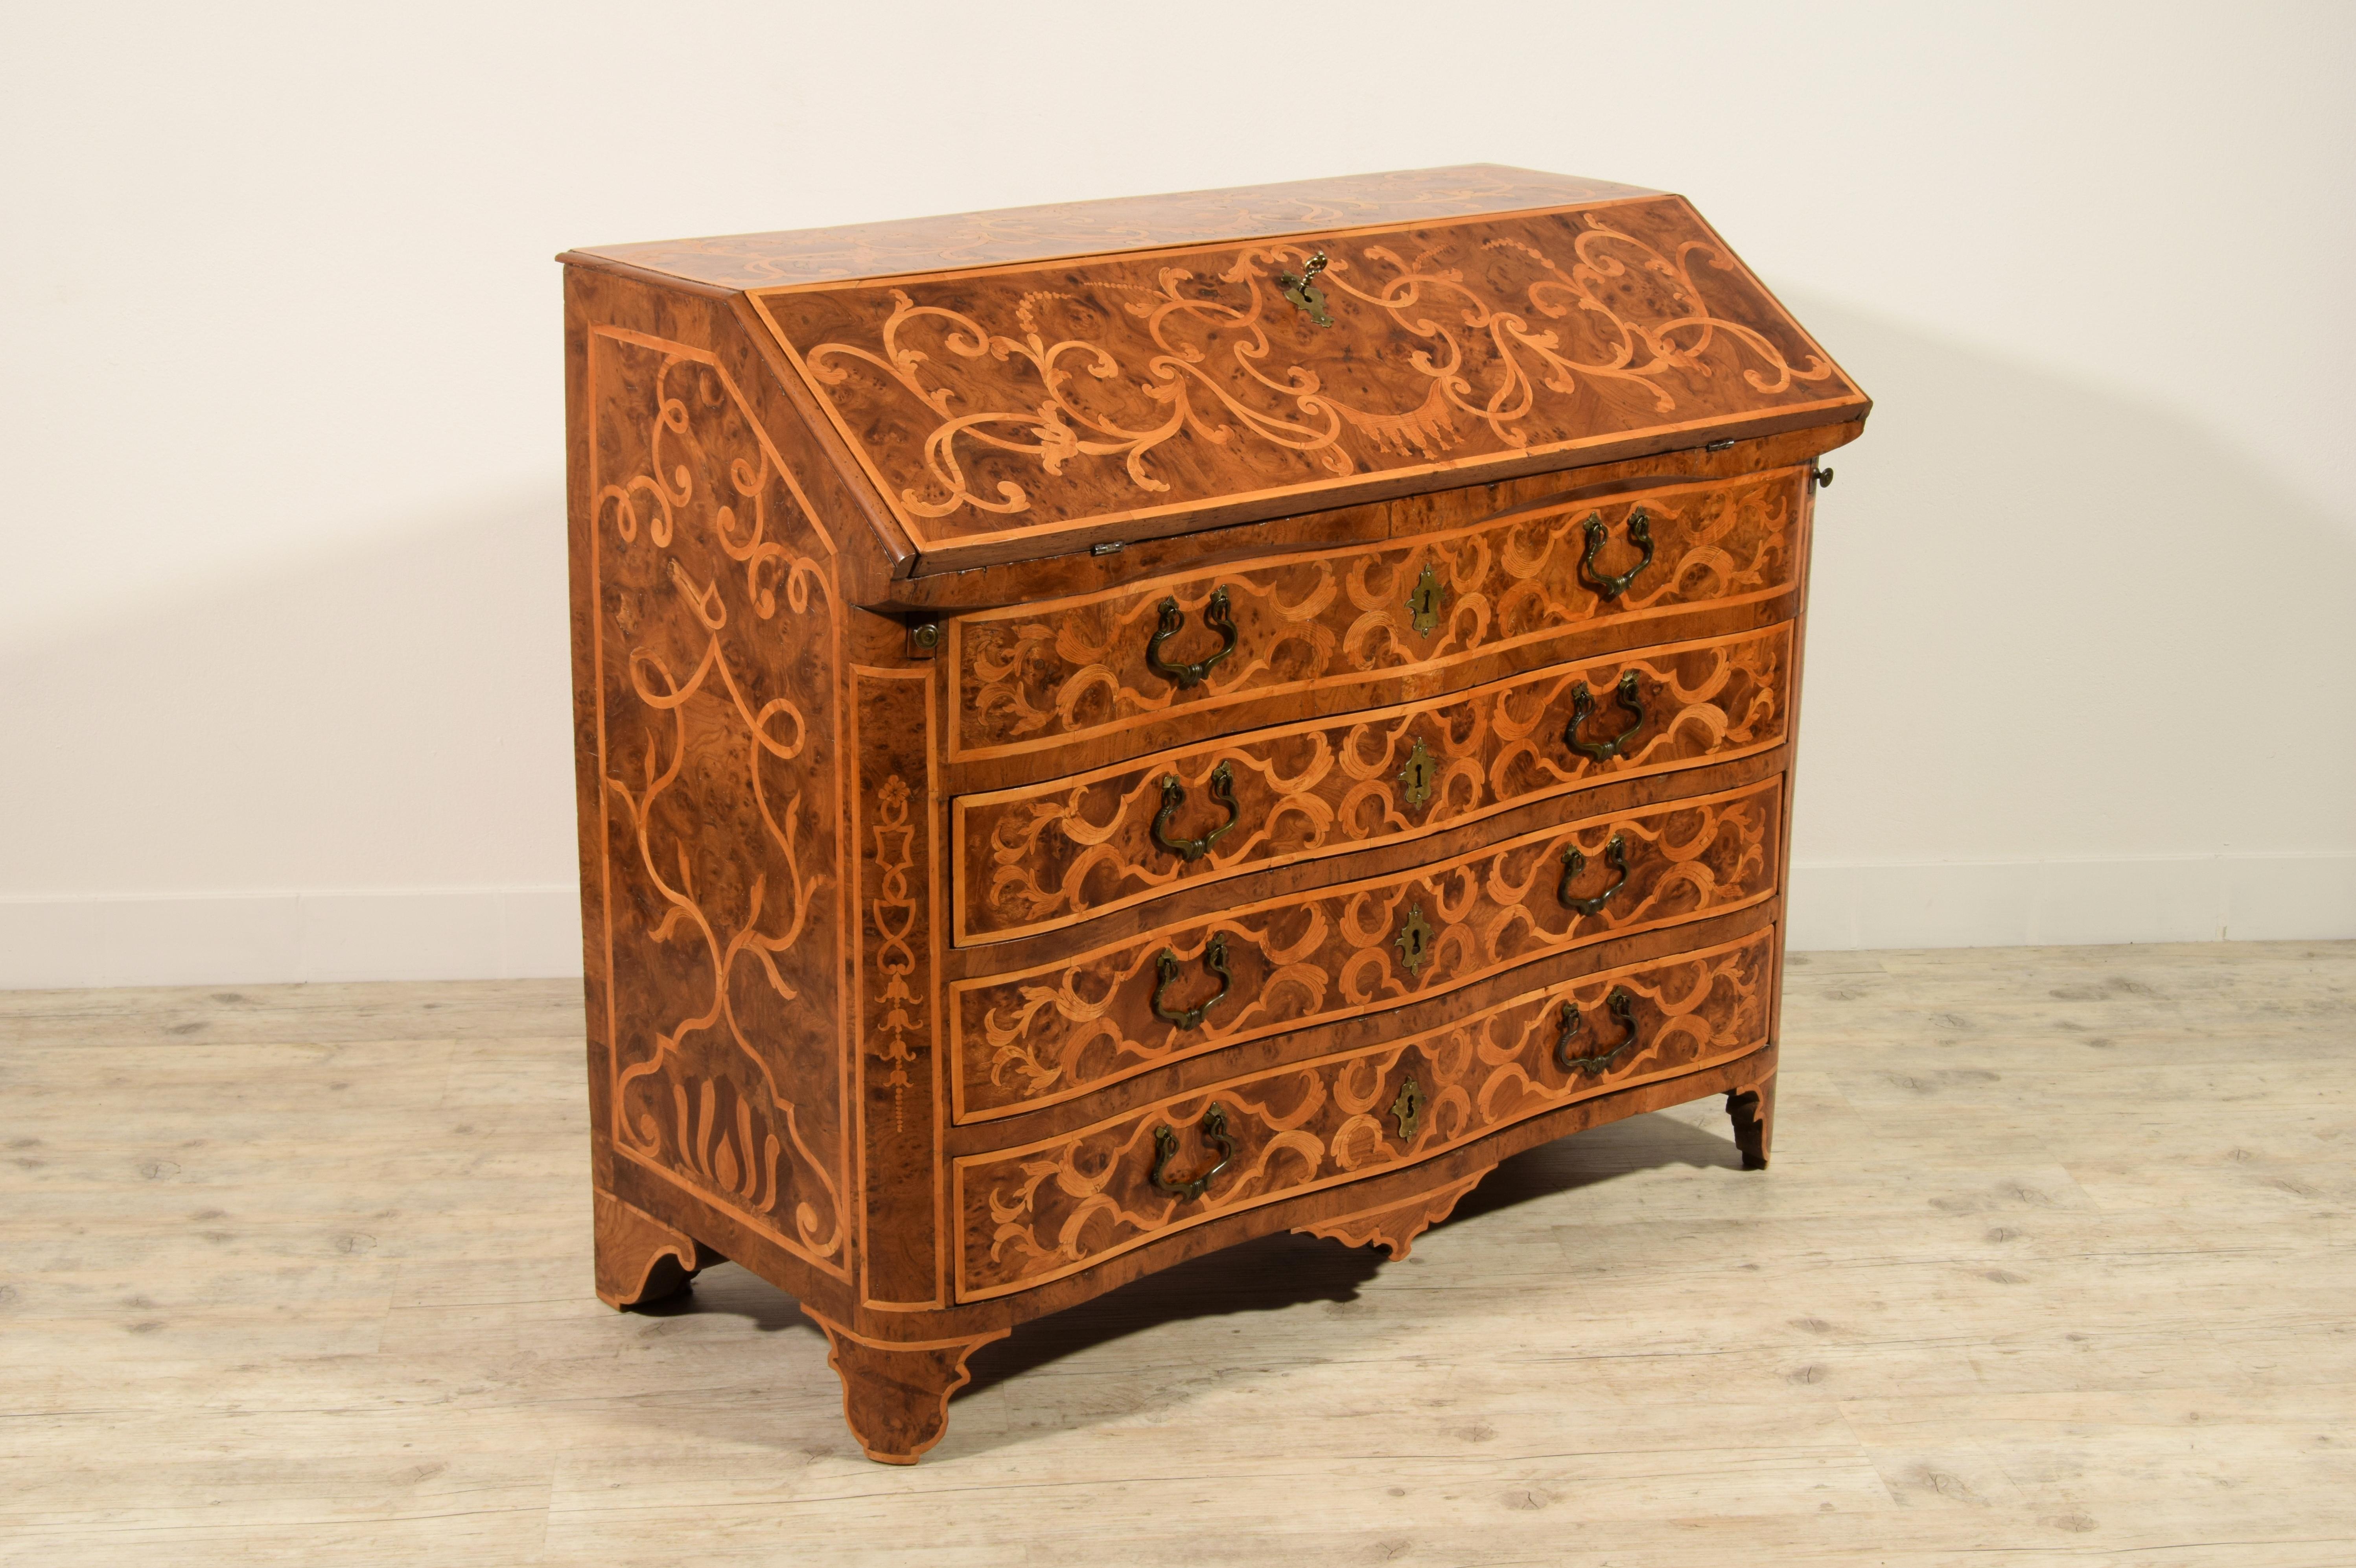 18th Century, Italian Inlaid Wood Chest of Drawers with Secretaire For Sale 5